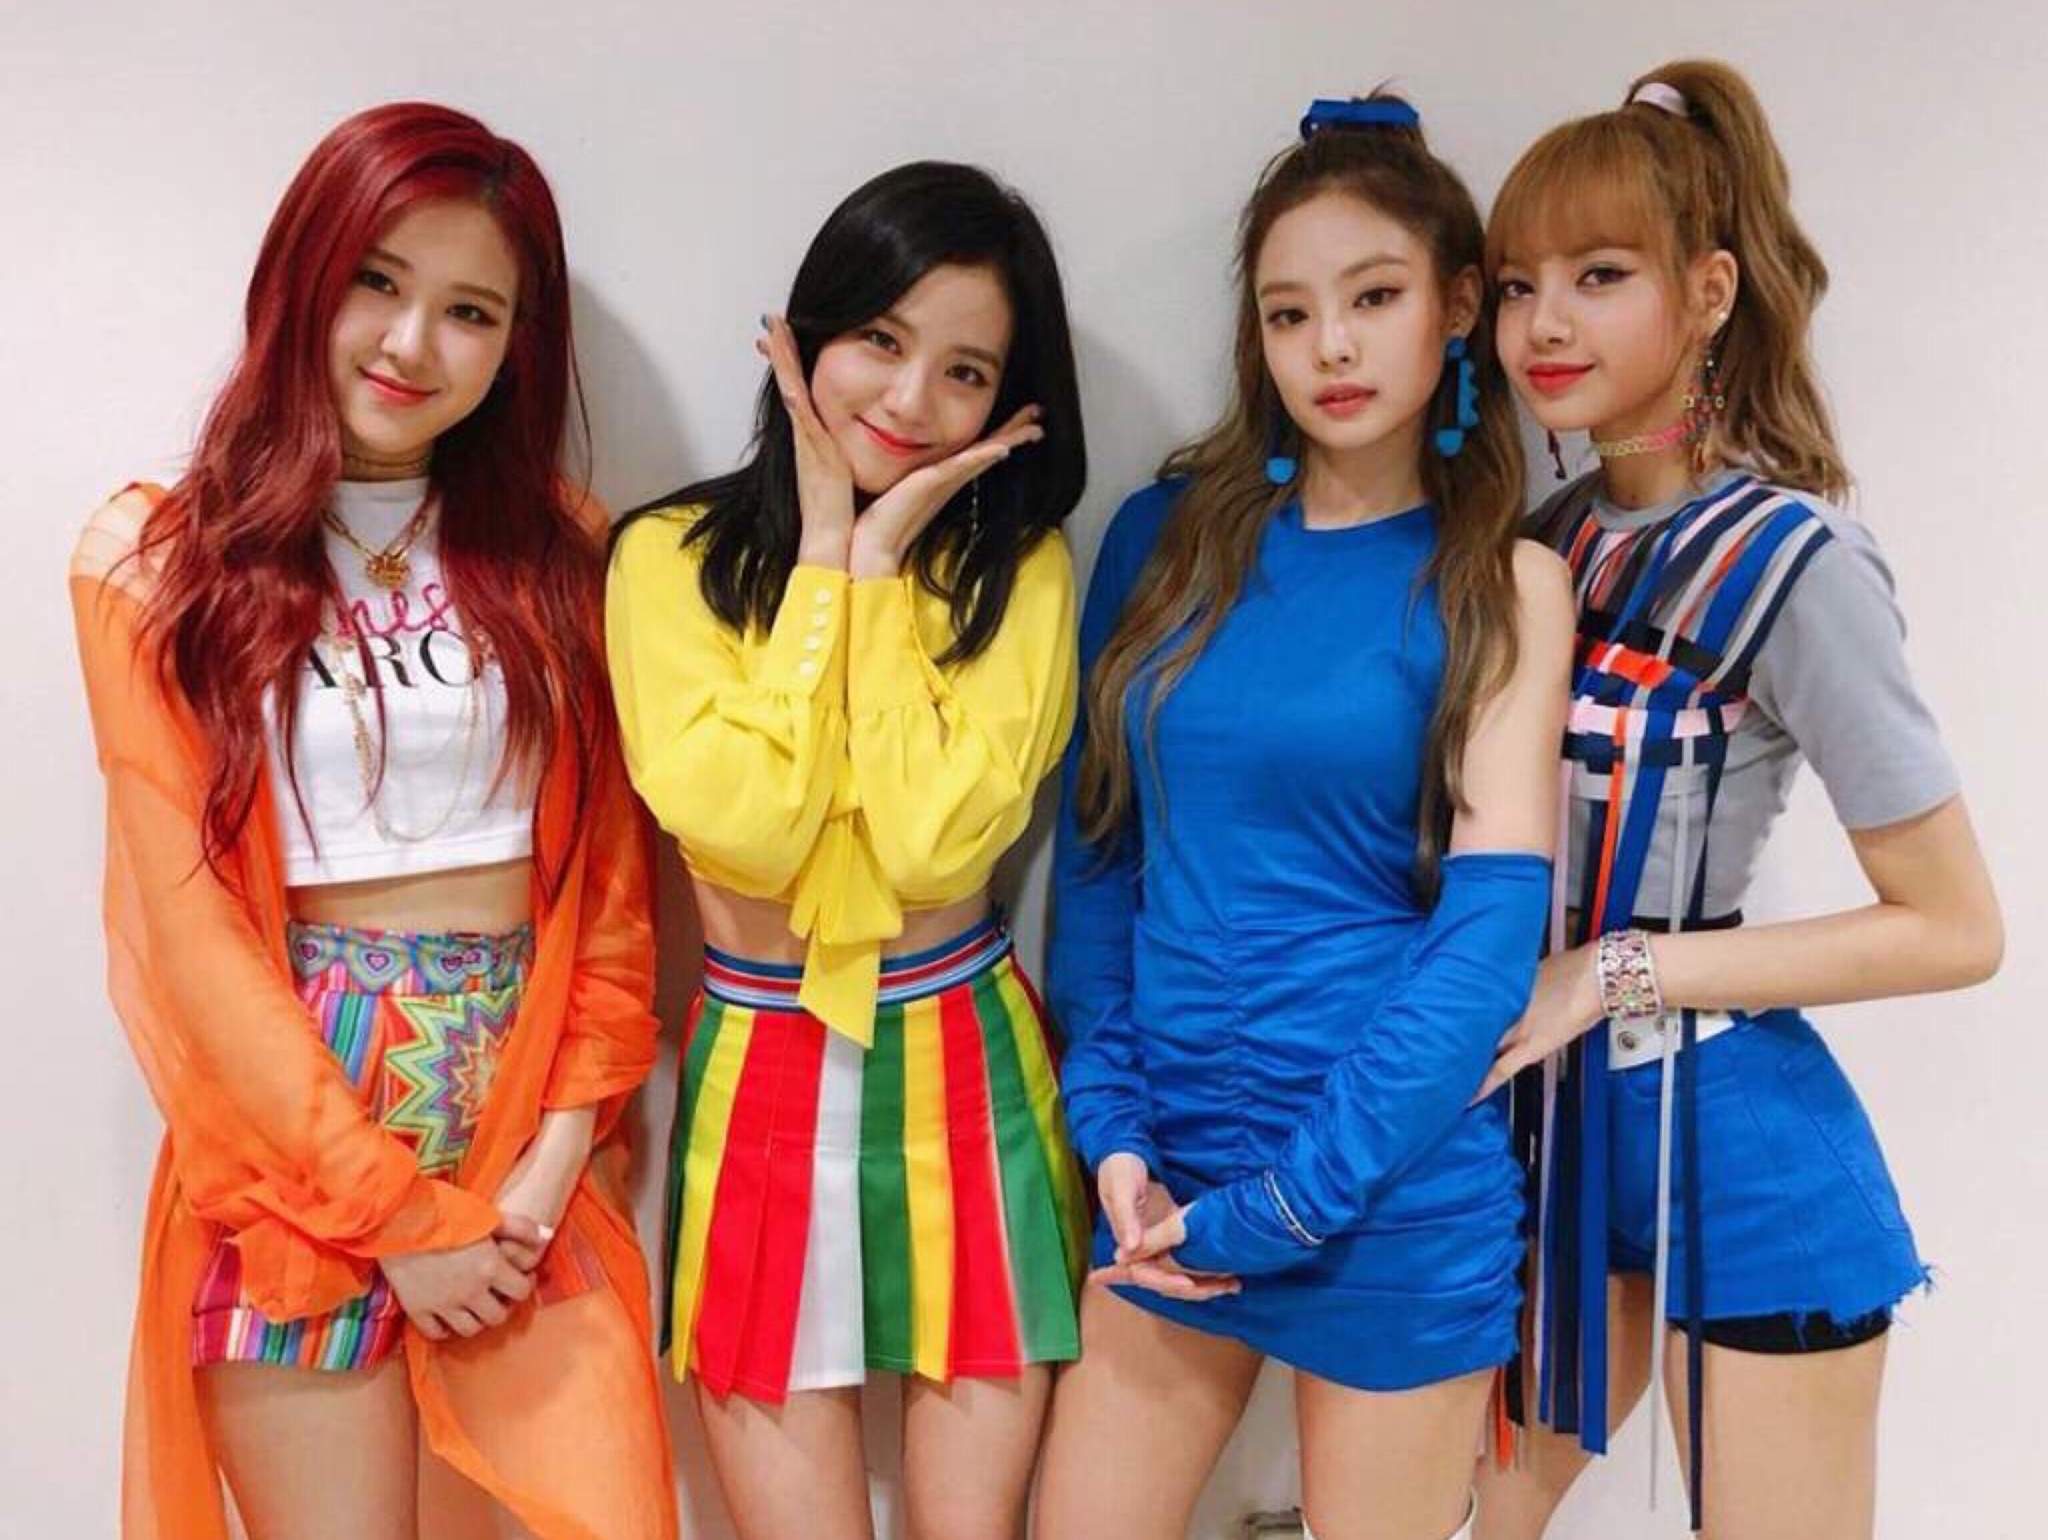 Forever Young Poderio Femenista Blackpink Amino Tteonaji ma just stay jigeum i siganeul meomchun chae neowa hamkkeramyeon nan i could die in this moment. amino apps